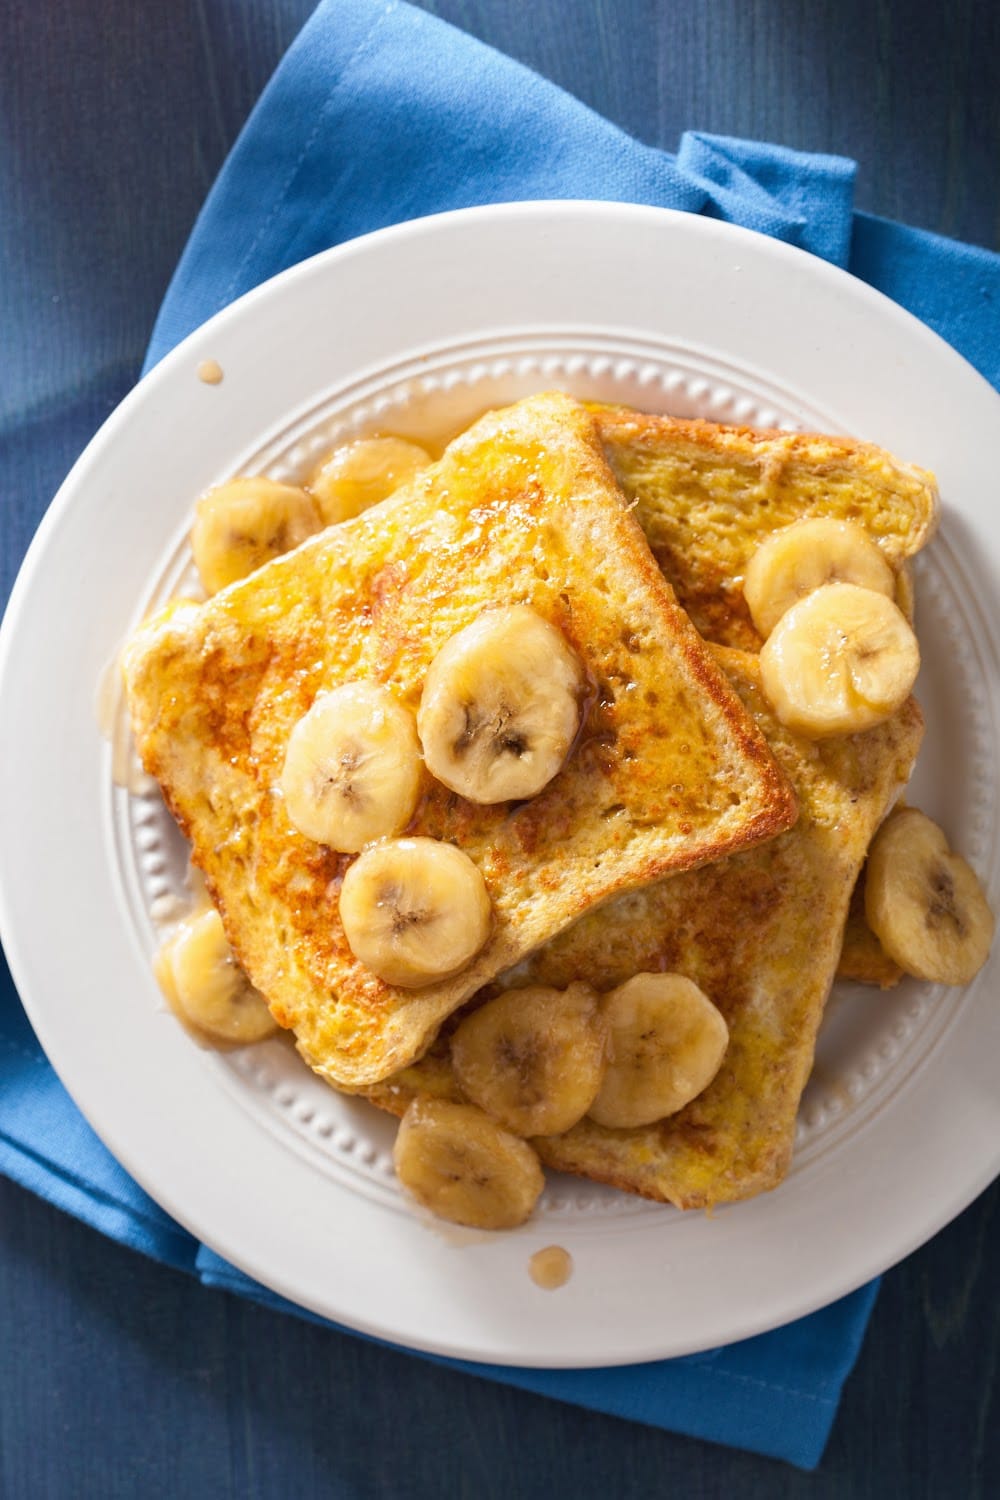 French Toast use stale bread